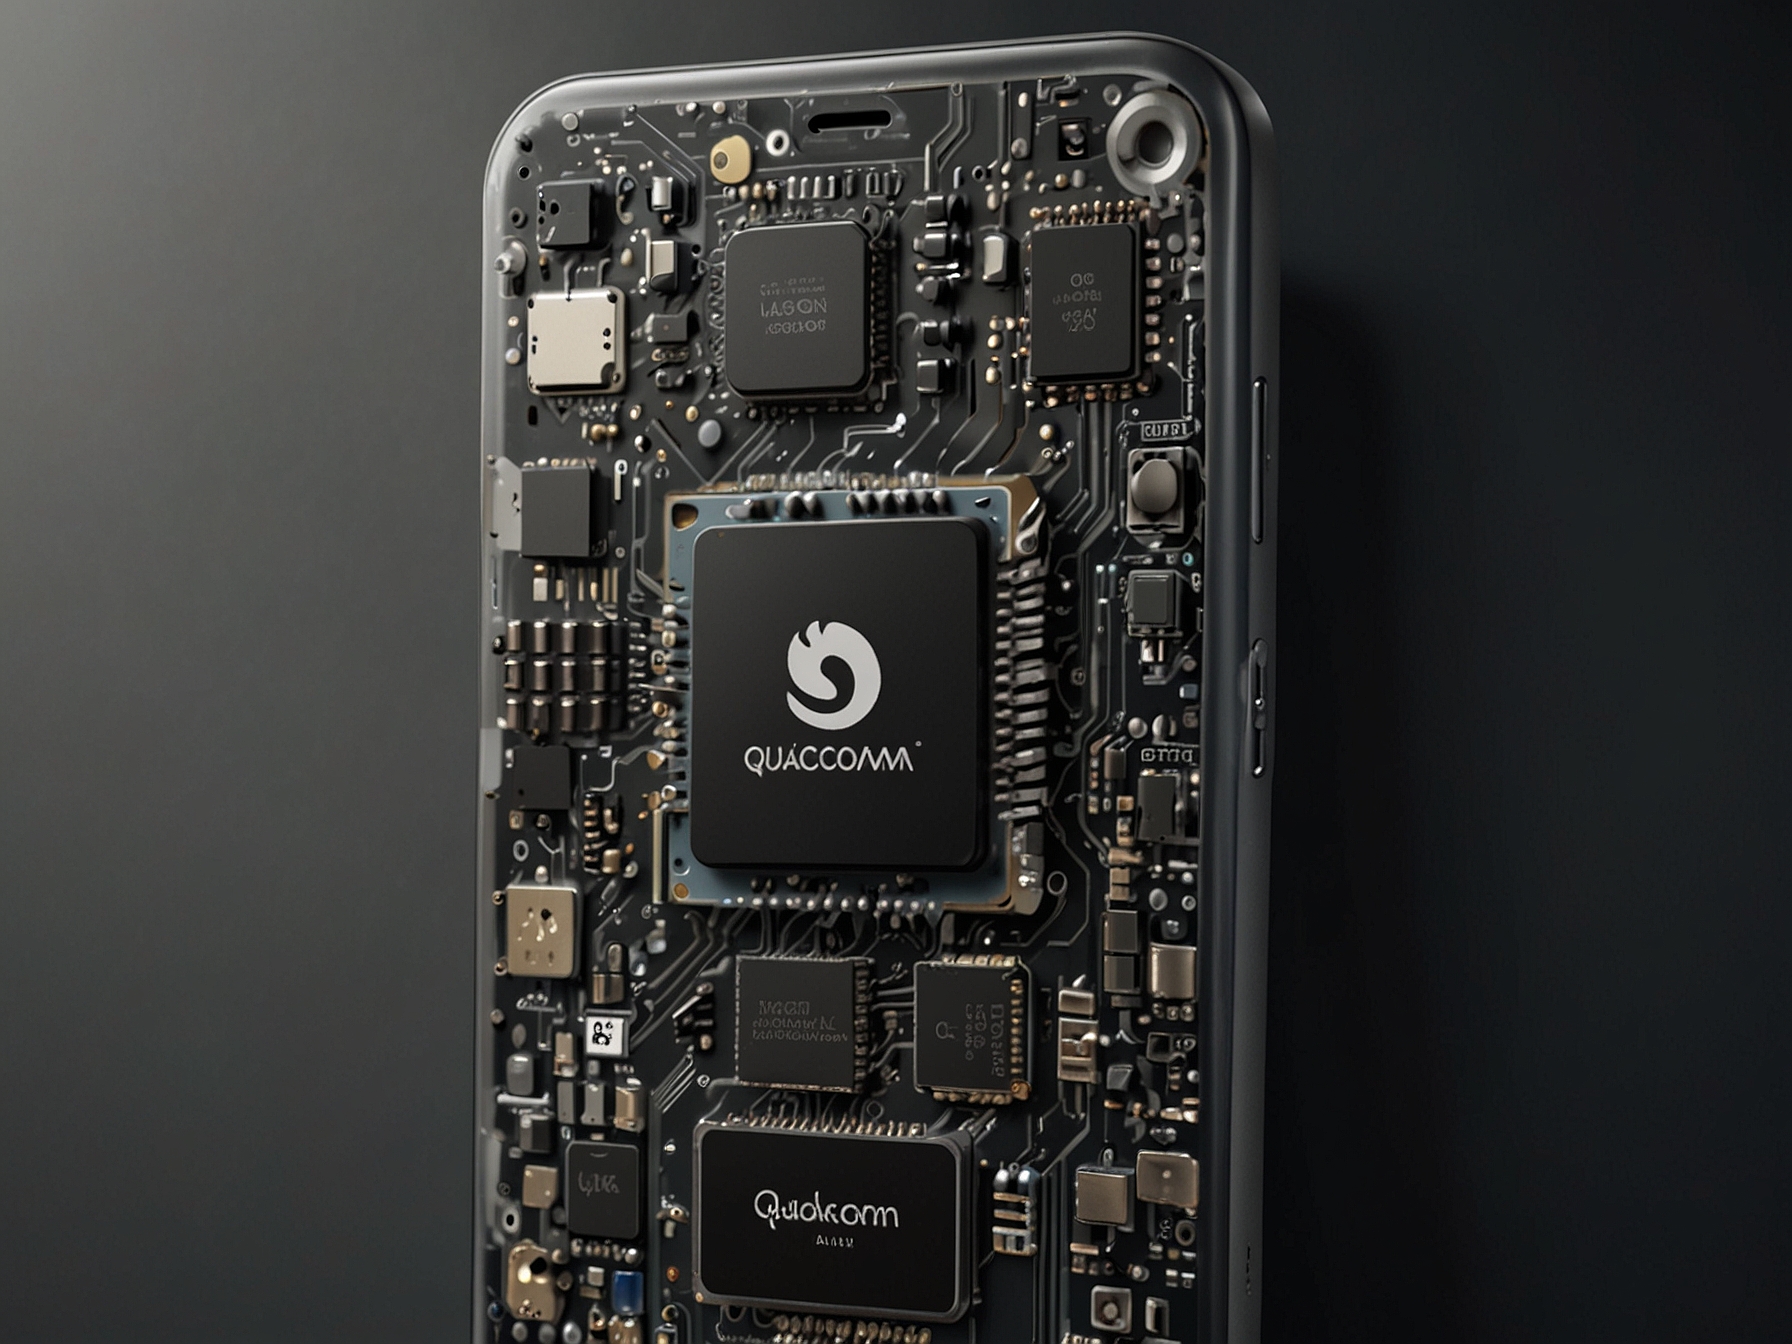 A close-up of a smartphone powered by Qualcomm’s Snapdragon processor, showcasing advanced AI capabilities. Background elements hint at other applications like IoT devices and smart city technologies.